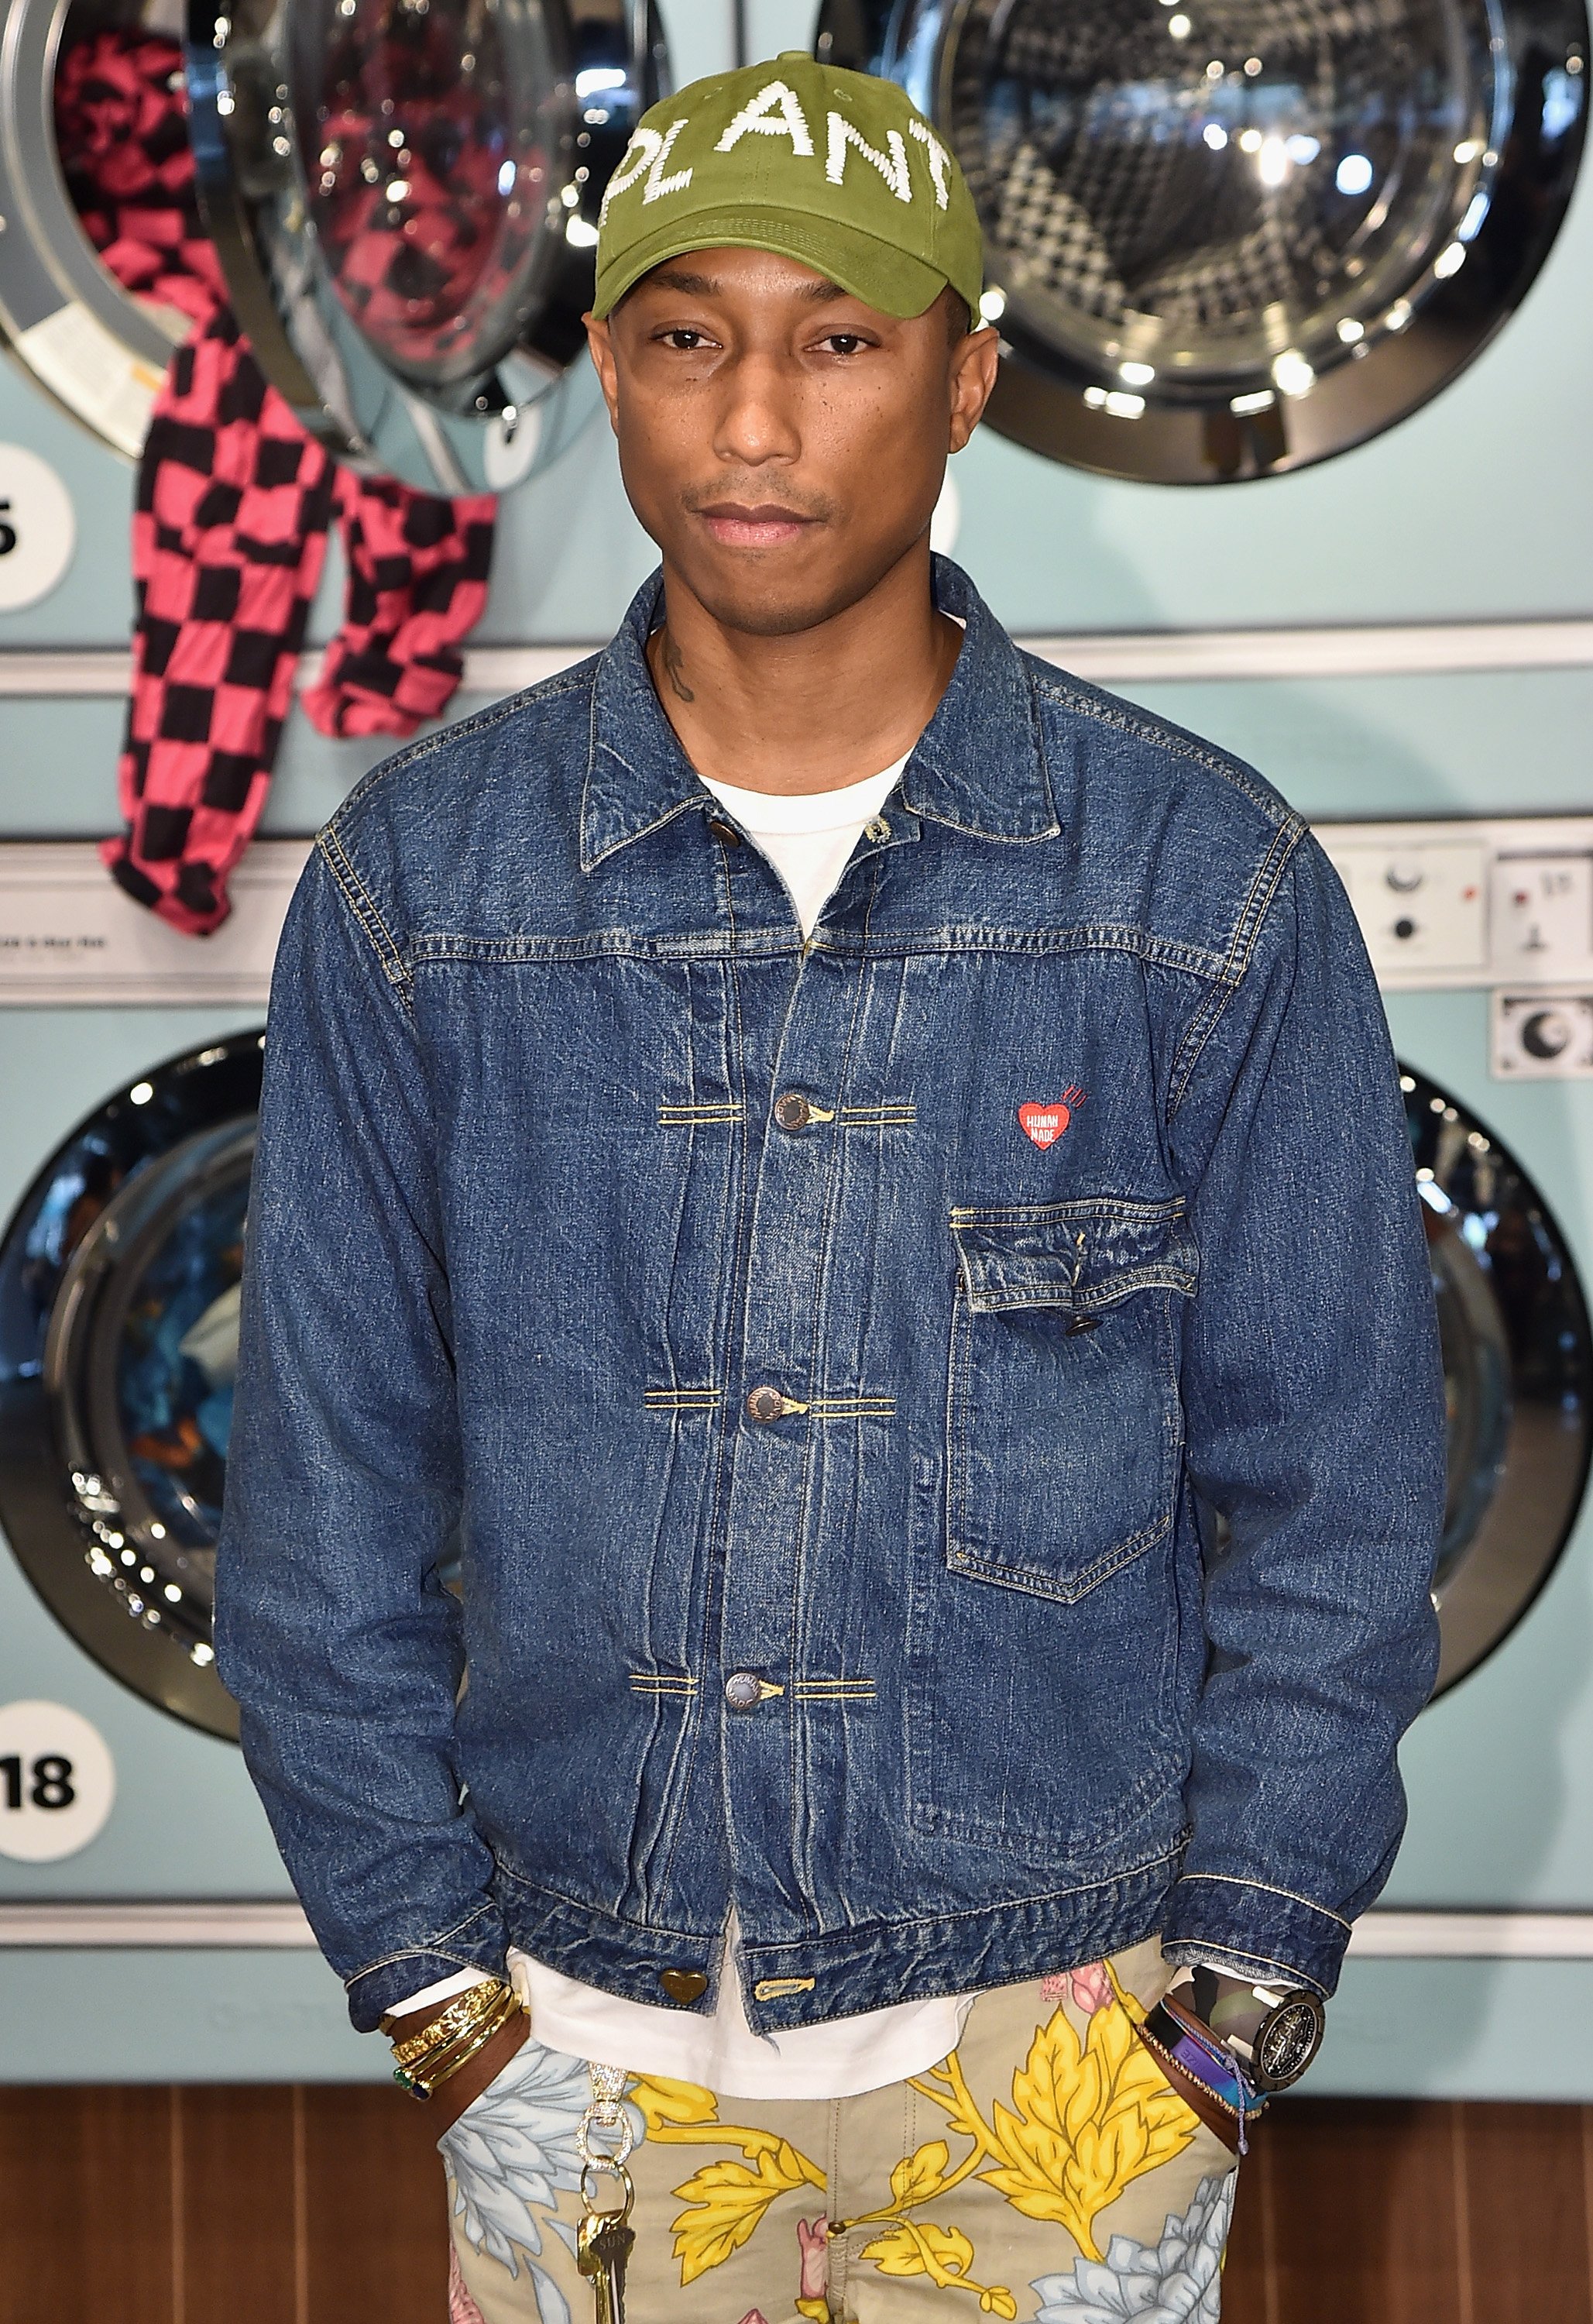 Pharrell Williams attending an event at New York Fashion Week in September 2017. | Photo: Getty Images